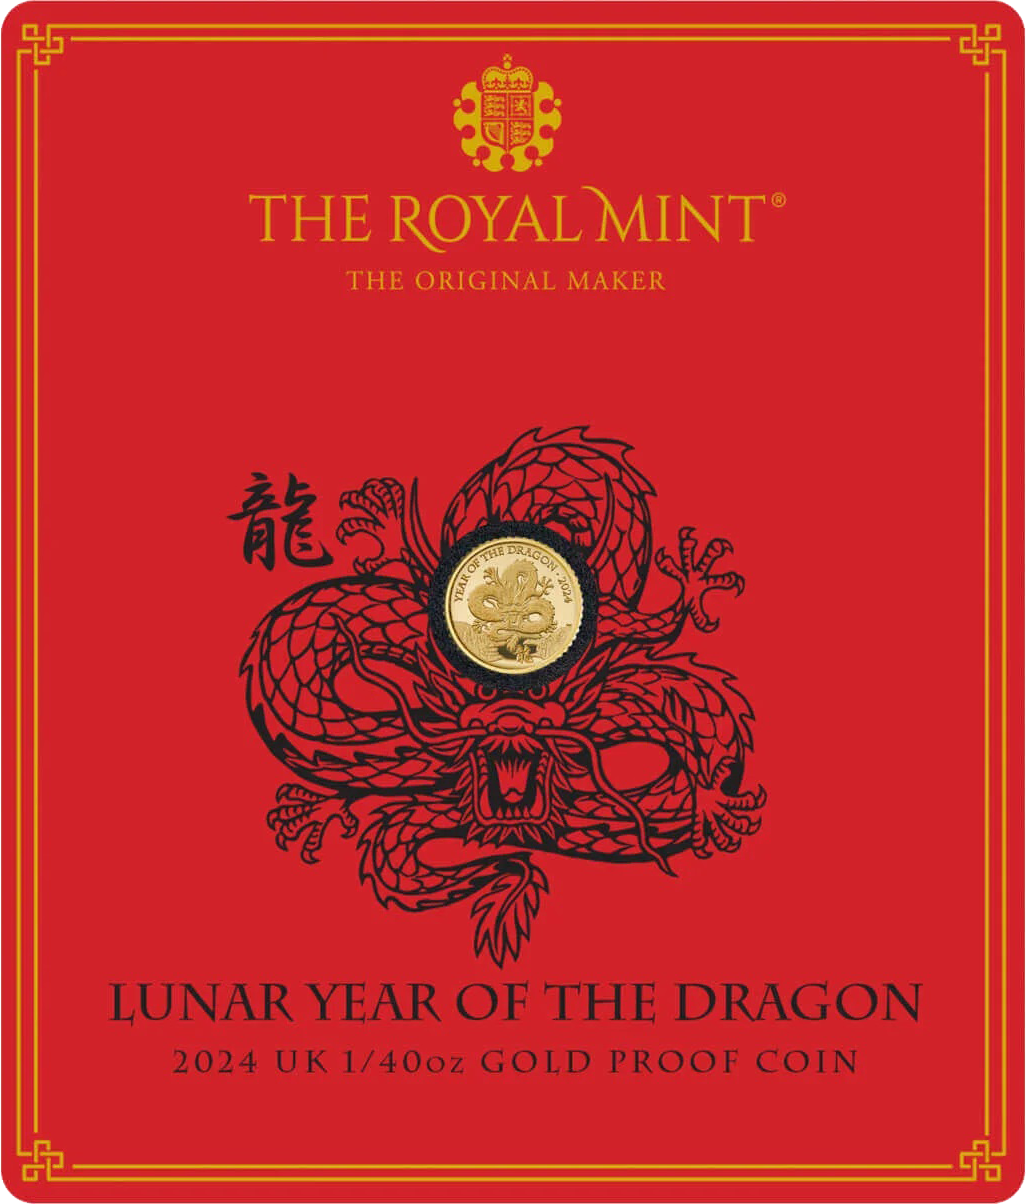 uk24ld40g---lunar-year-of-the-dragon-2024-uk-1-40oz-gold-proof-coin-reverse-blister-pack-1500x1500-f3a2c67.png